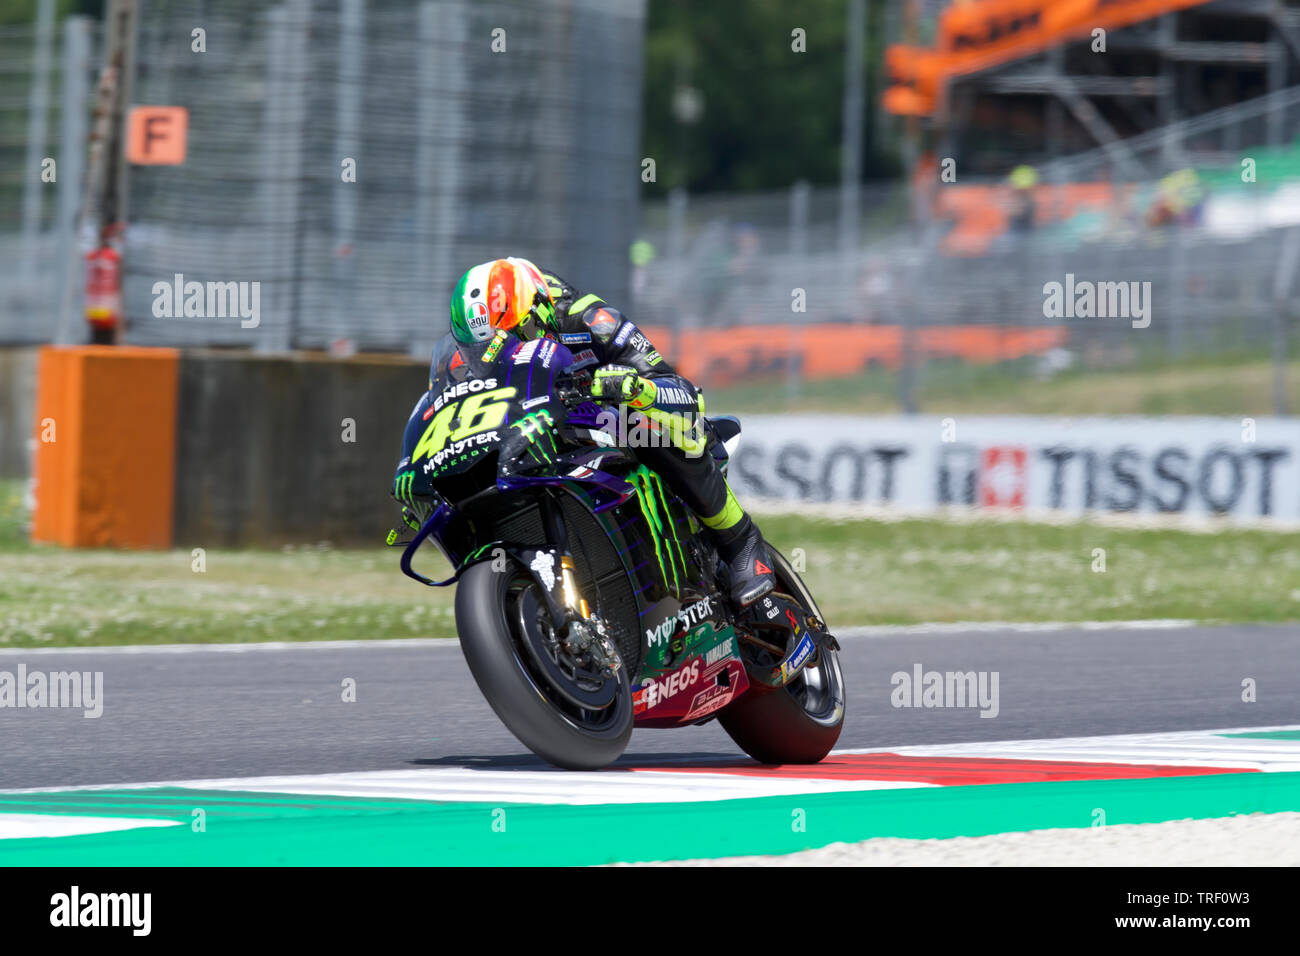 Valentino rossi during the free practise 3 of the italian GP of Mugello ...